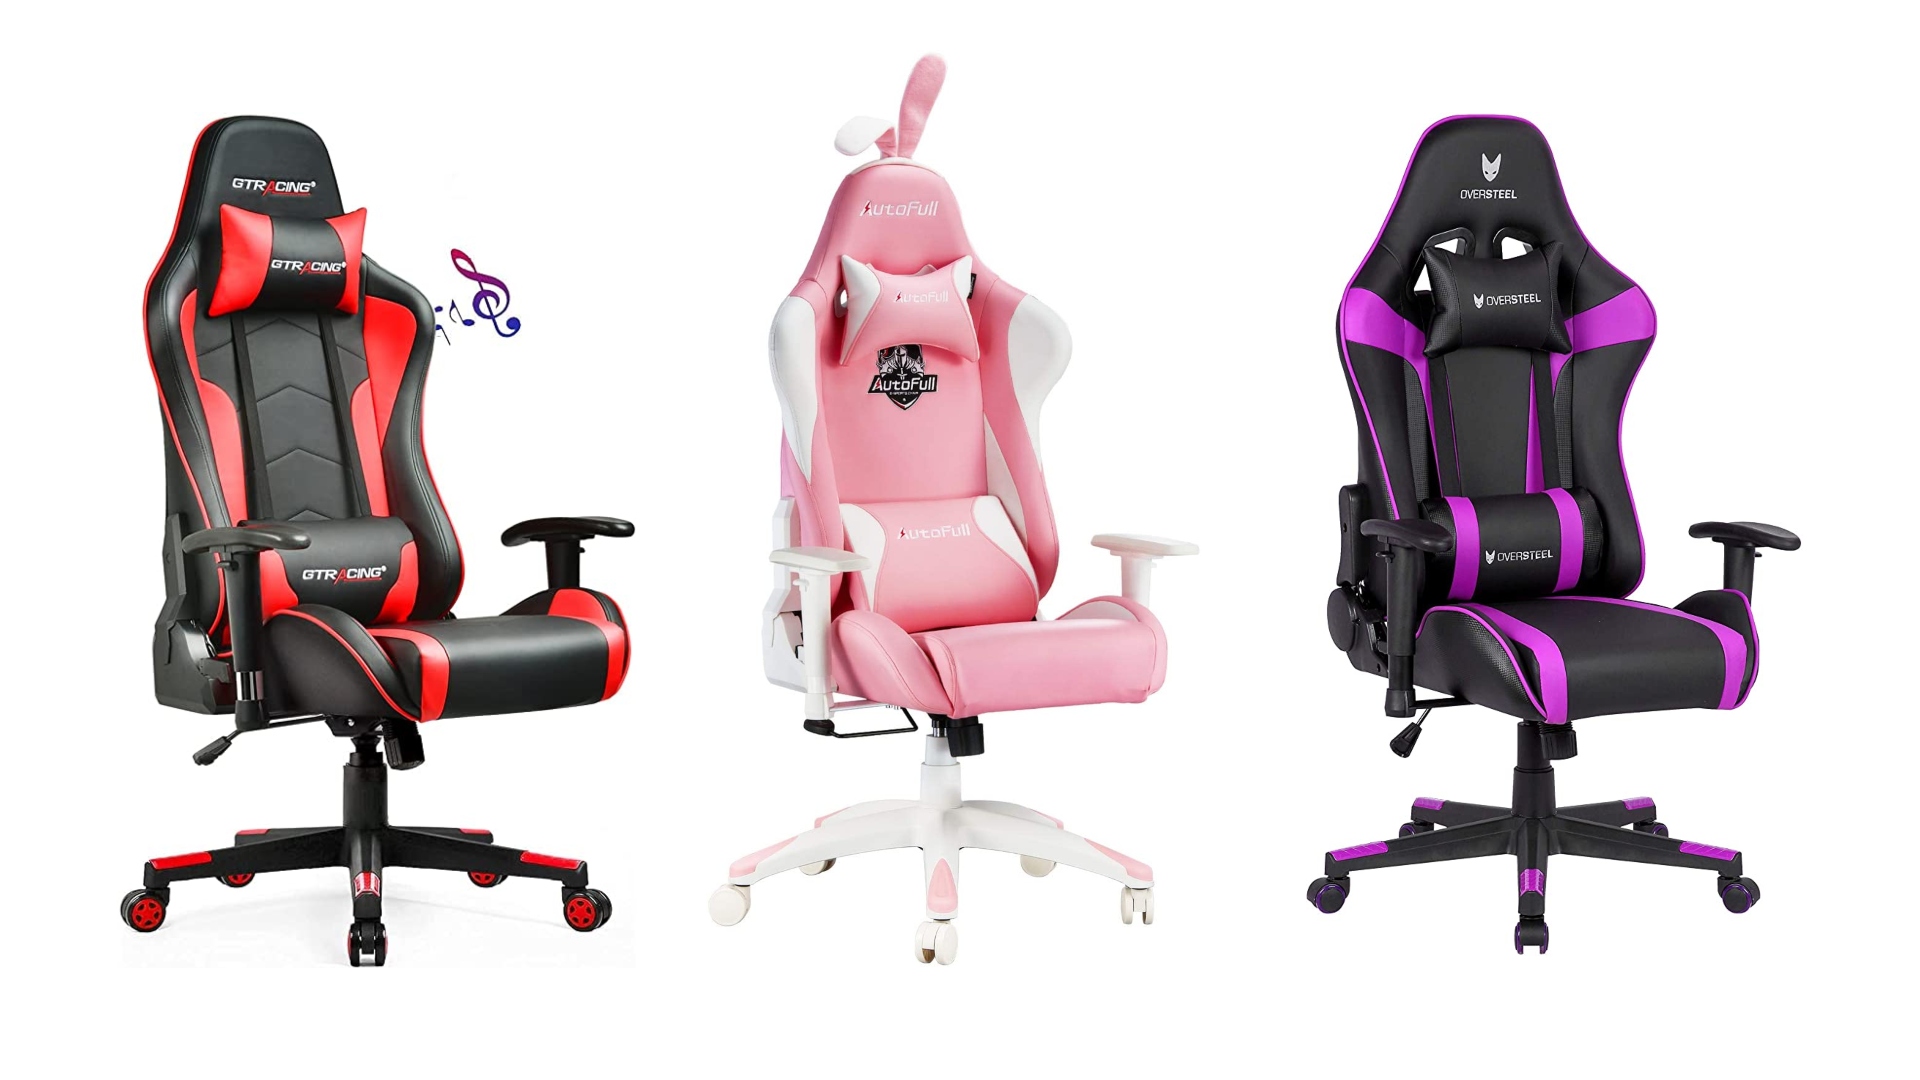 The Best Amazon Gaming Chairs